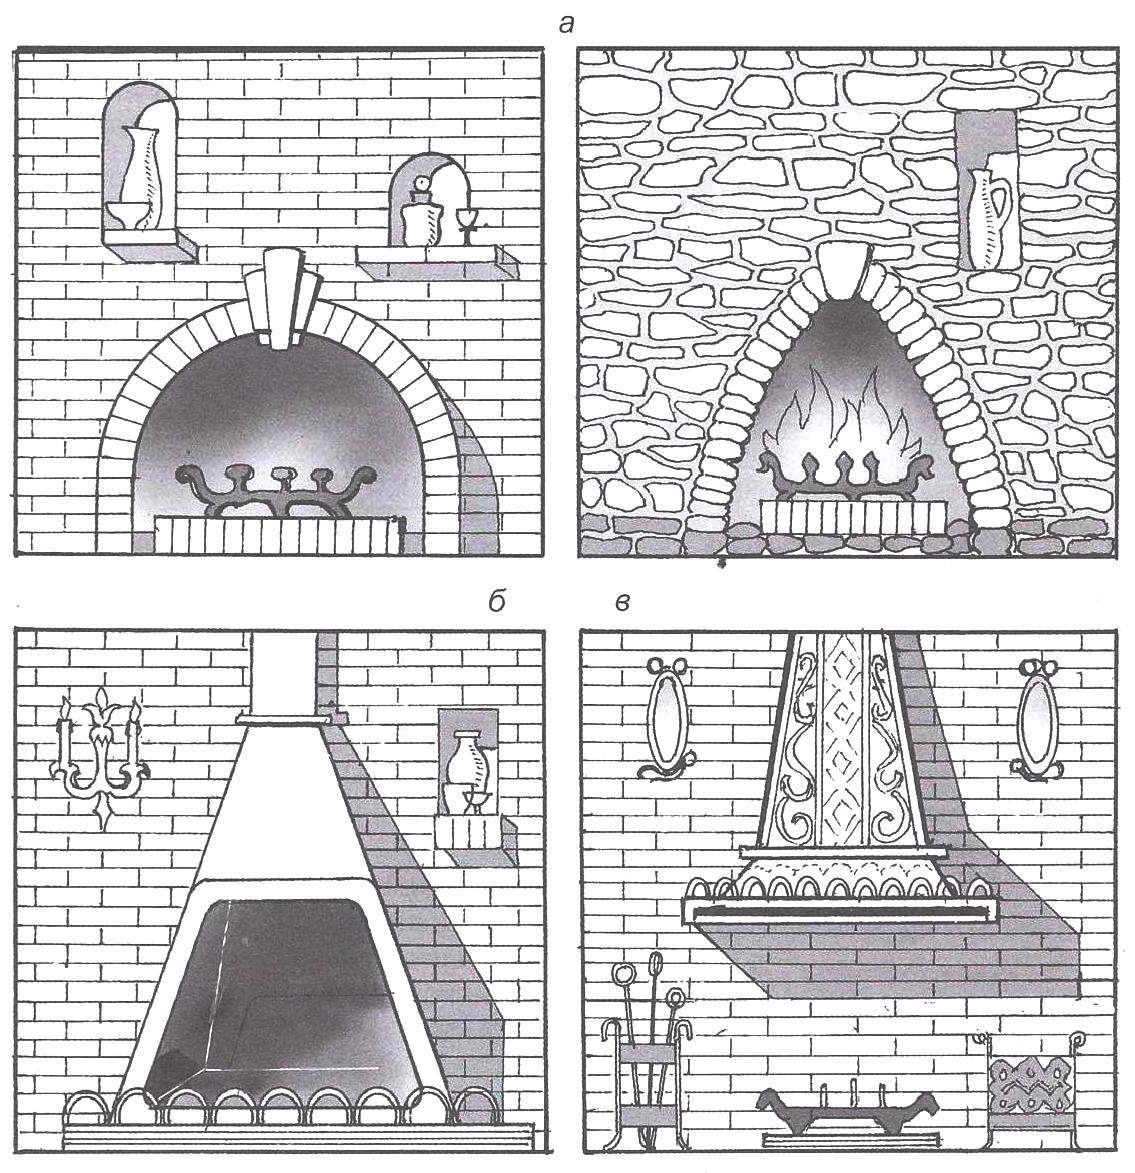 Fig. 1. The options of fireplace